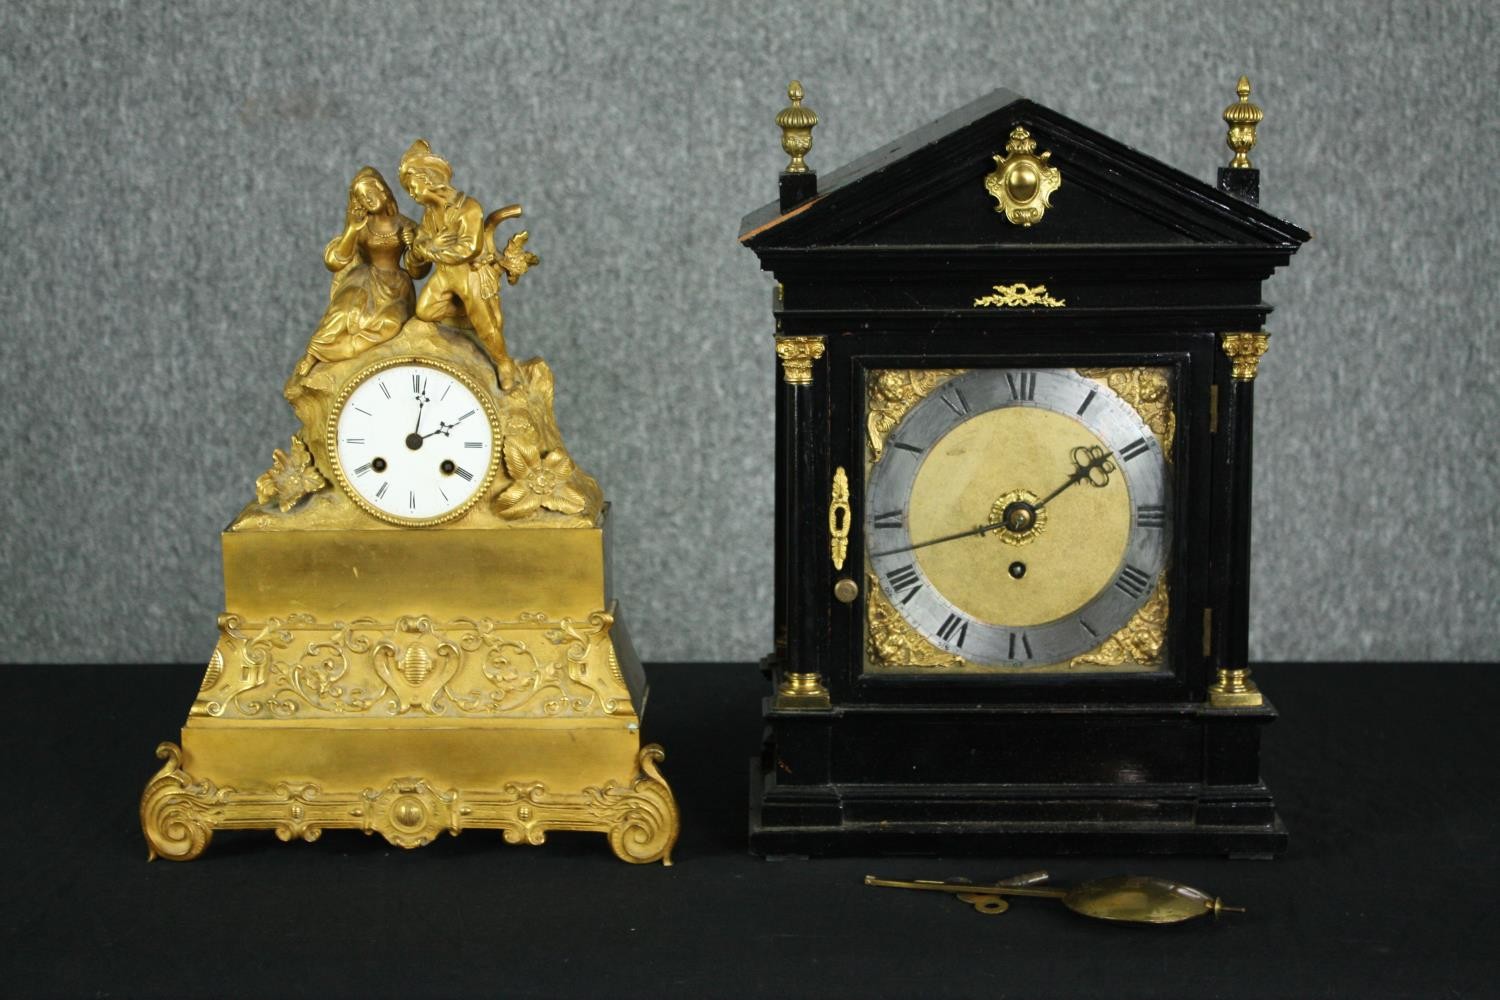 A 19th century French gilt metal mantel clock and a late 19th century ebonised and ormolu mounted